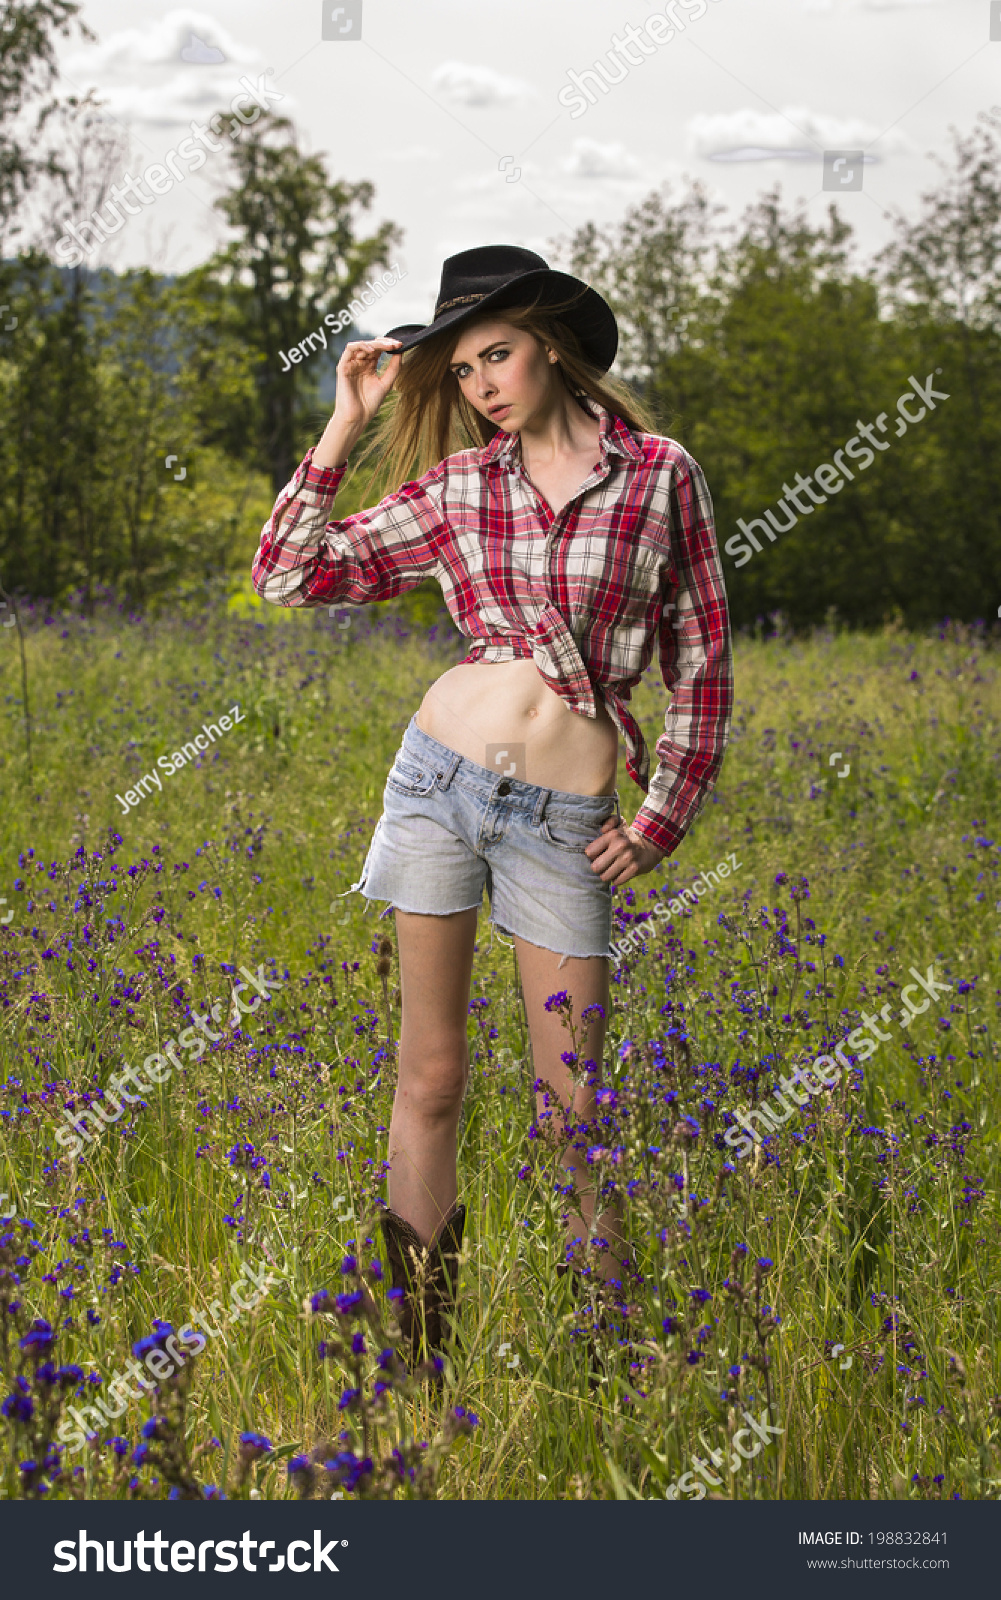 Young Female Model In Tied Up Flannel Shirt And Wearing Cowboy Hat ...